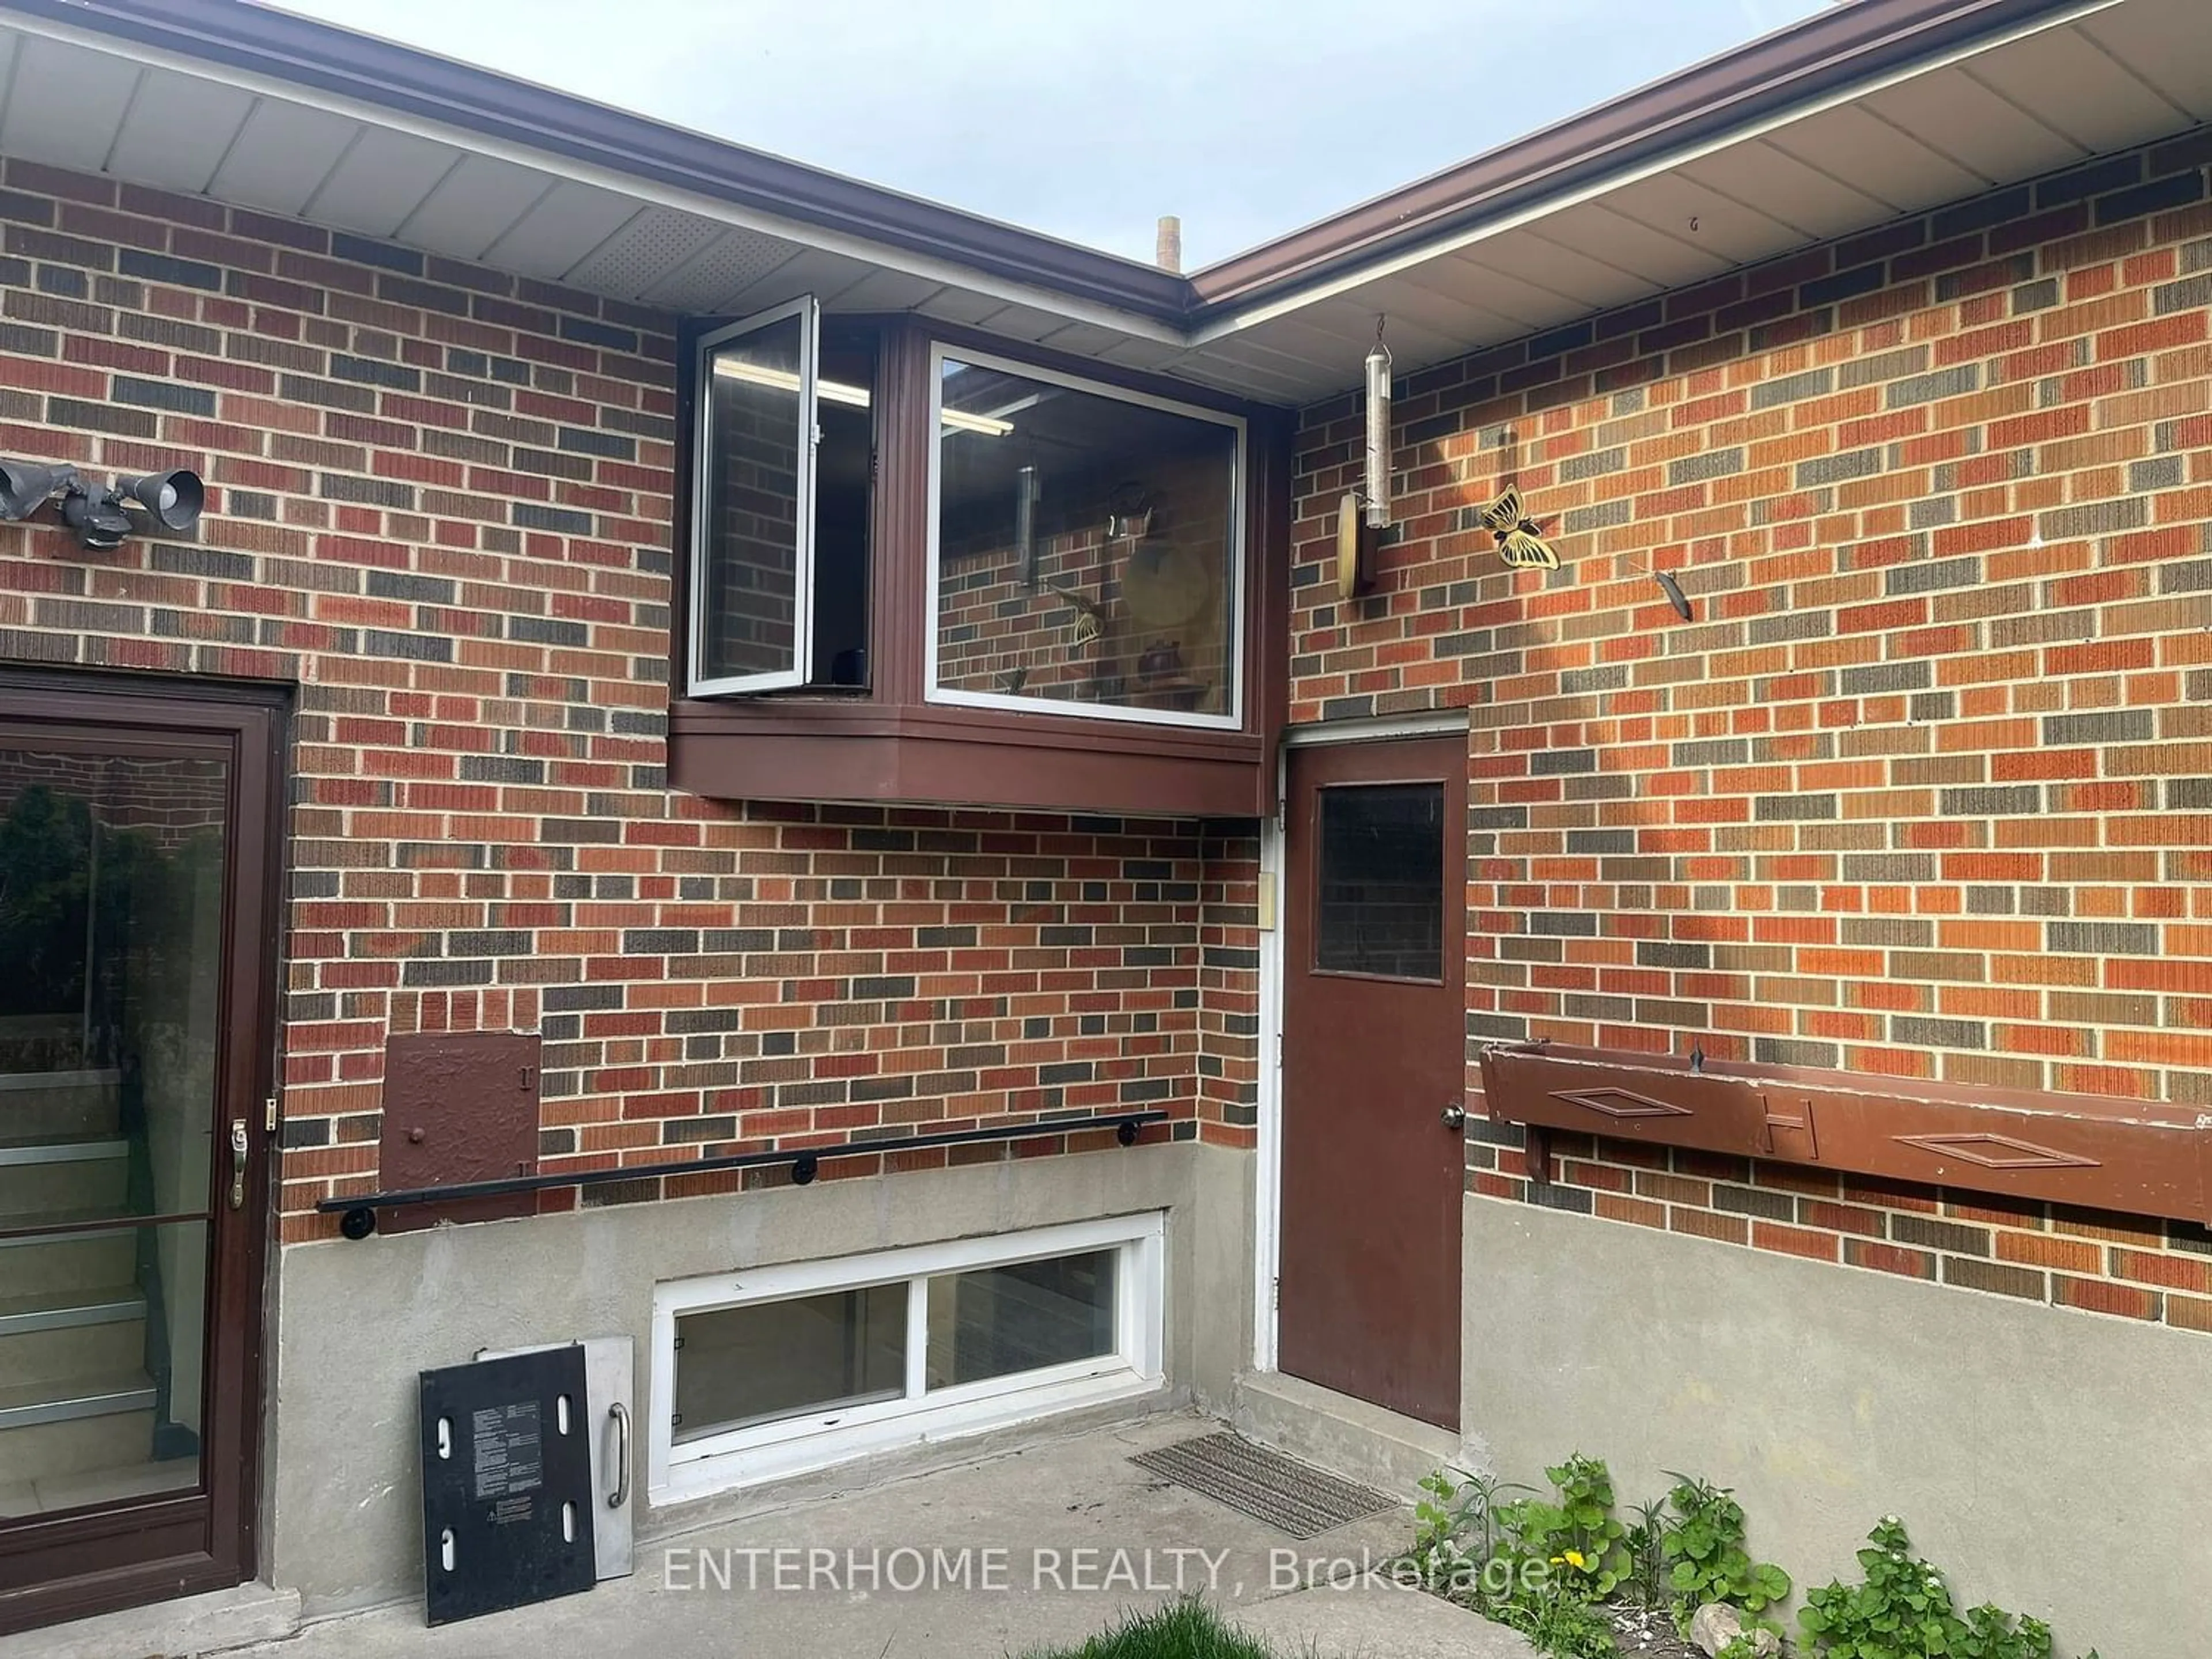 Home with brick exterior material for 6 Wallbridge Crt, Toronto Ontario M2R 1W1